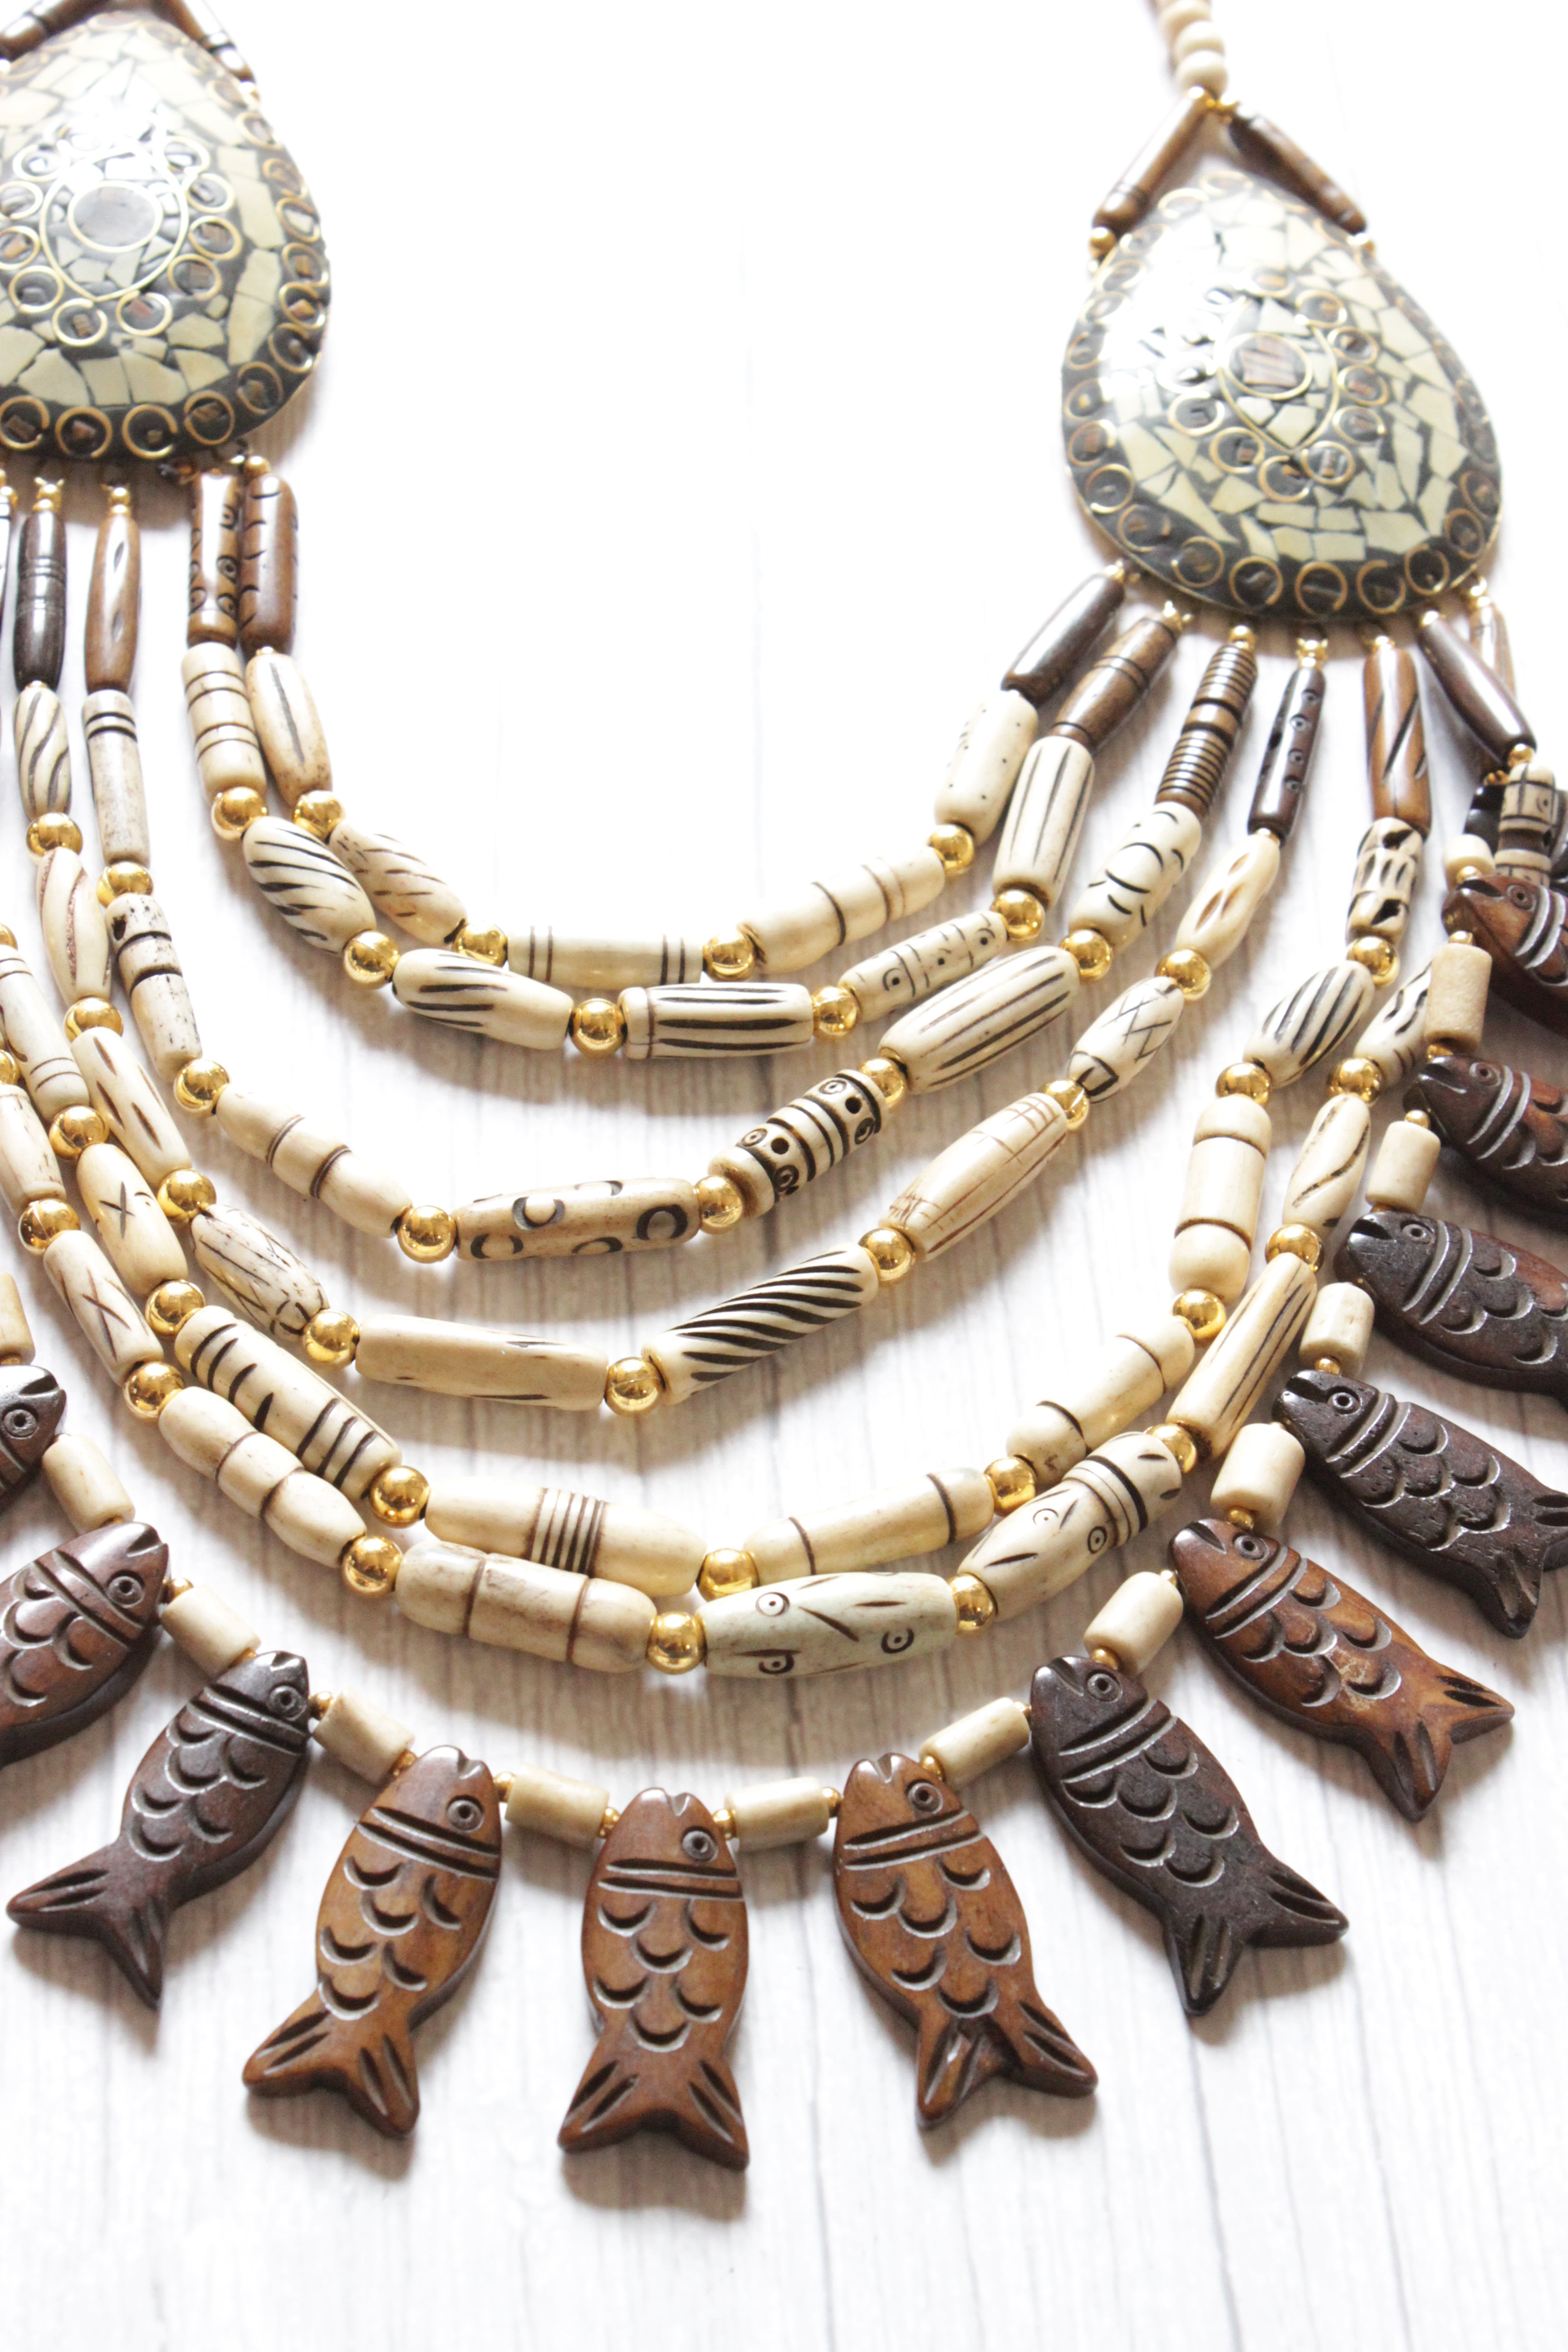 White and Brown Beads Handcrafted Statement African Tribal Necklace